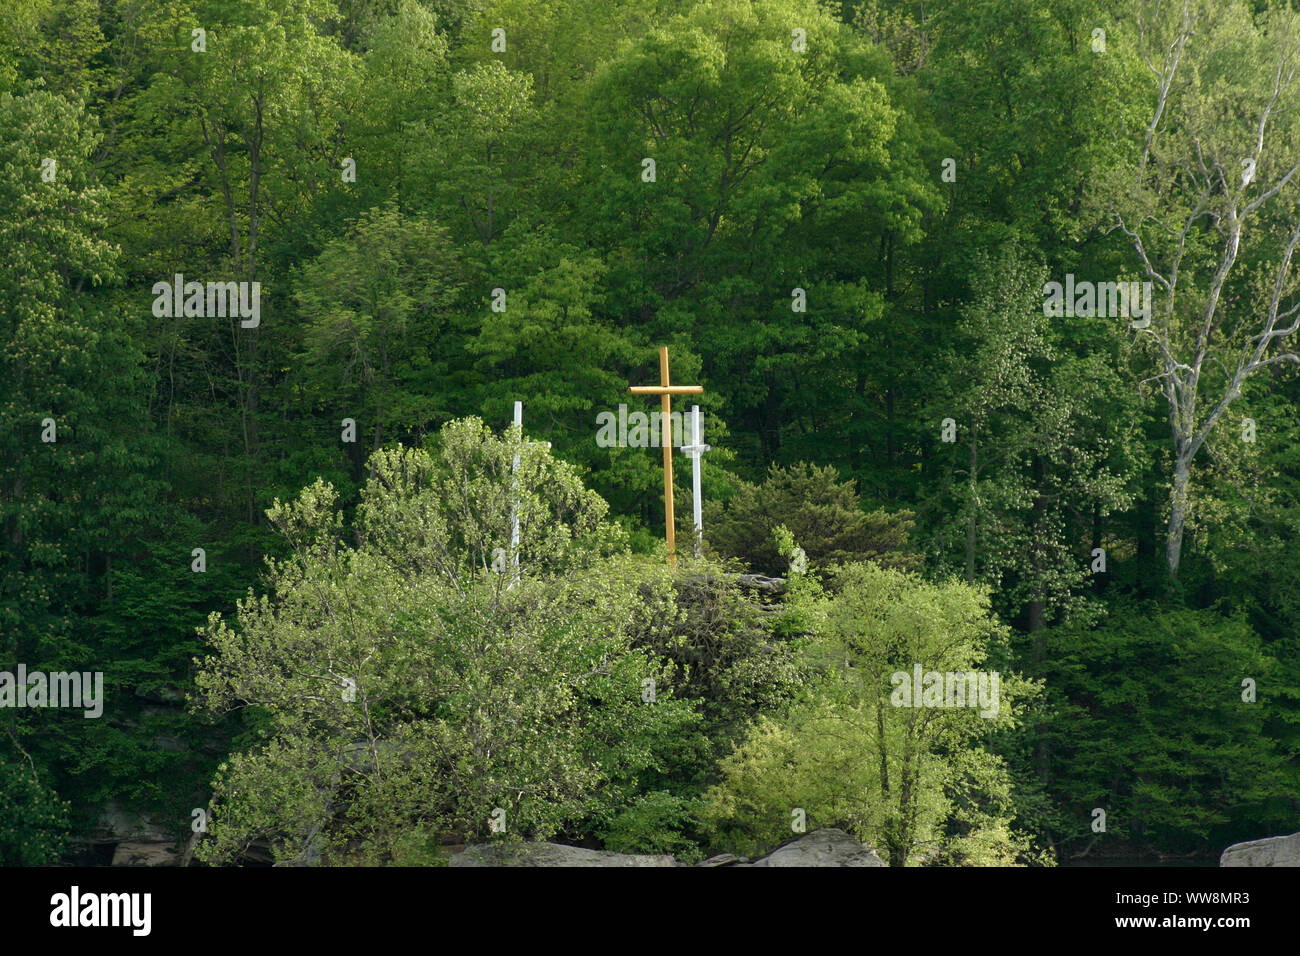 Gauley River in West Virginia, USA. Three crosses visible on a rock, a Christian symbol of resurrection. Stock Photo